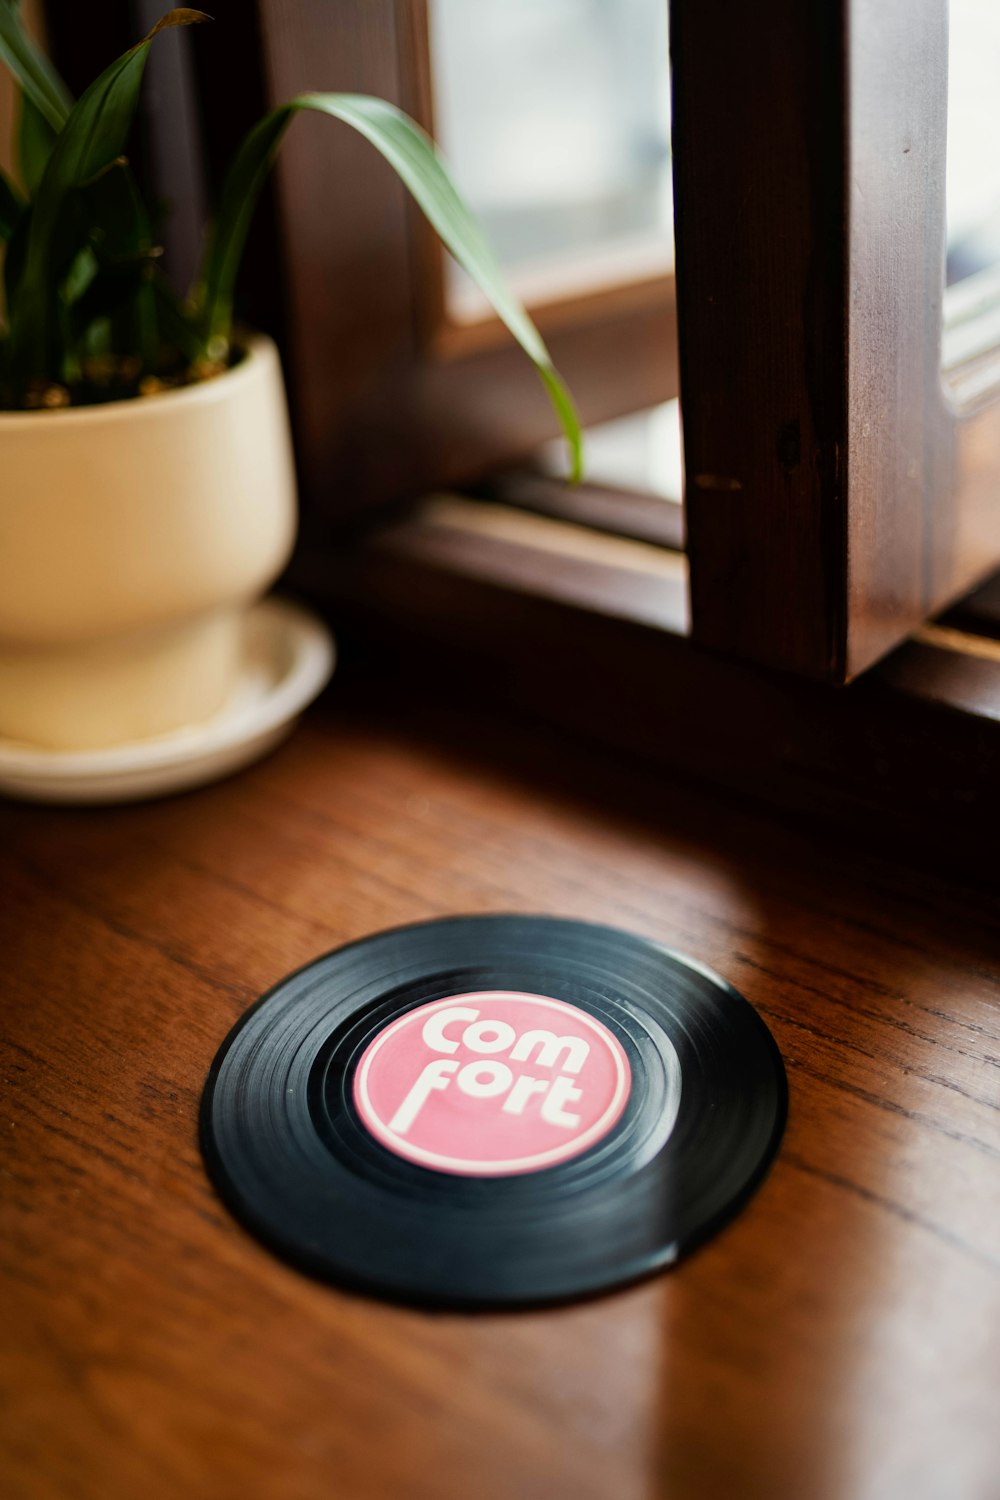 a record sitting on a table next to a potted plant